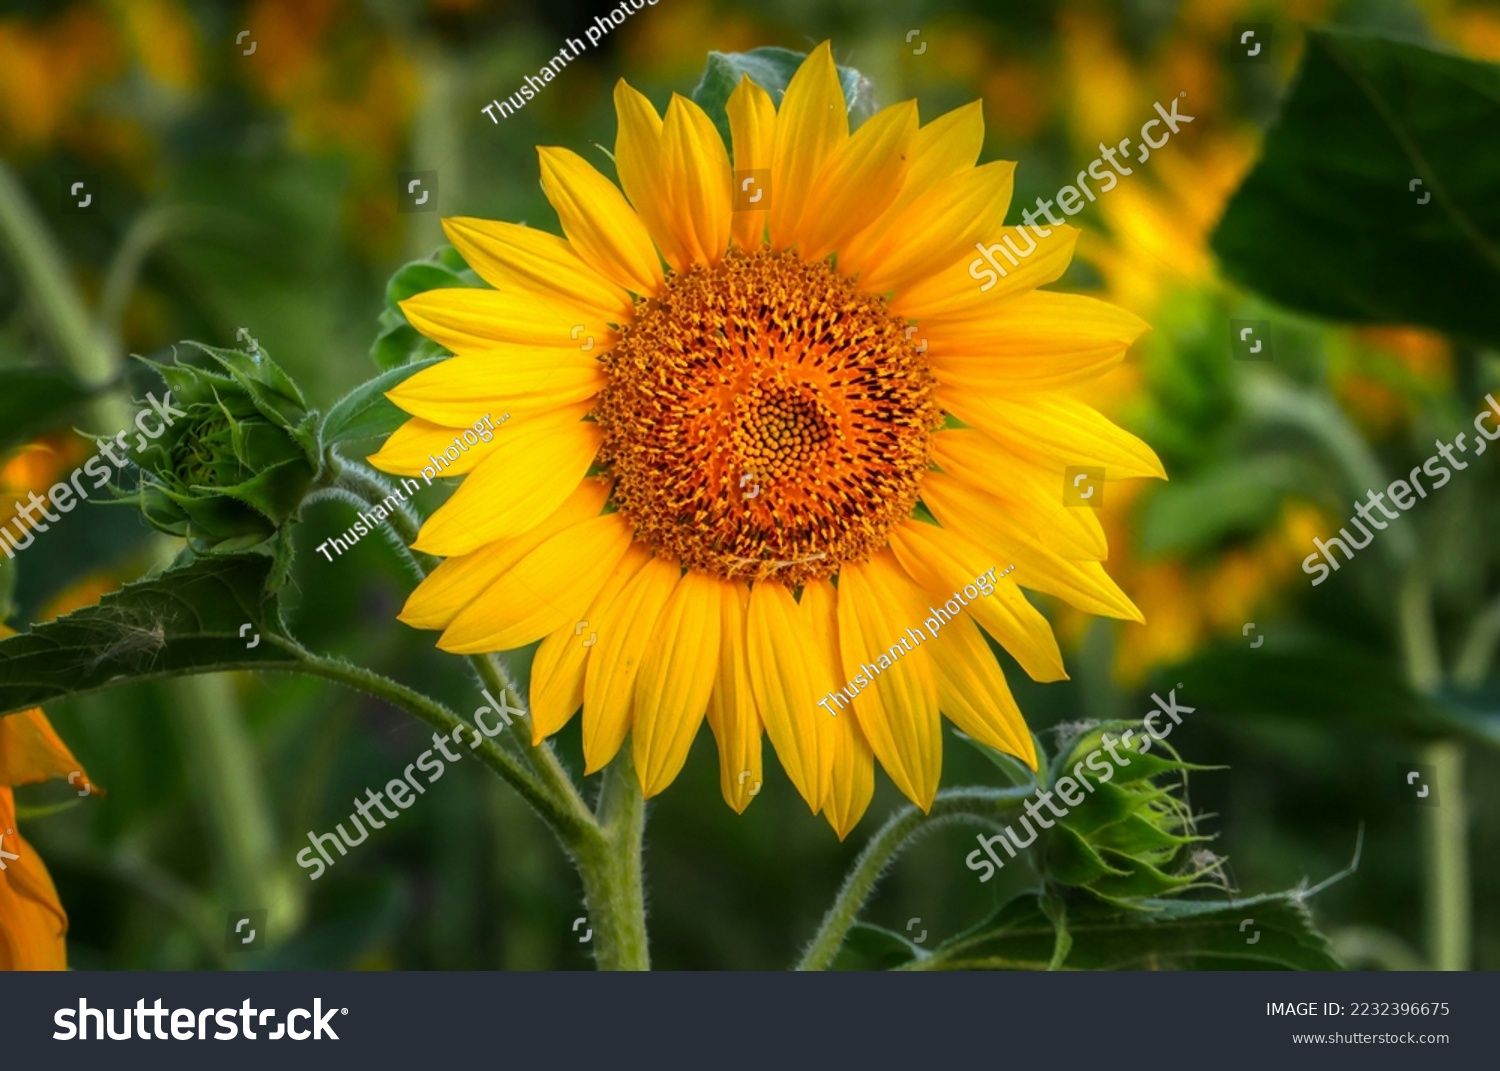 Sunflower natural background, Sunflower blooming, Sunflower oil improves skin health and promote cell regeneration #2232396675